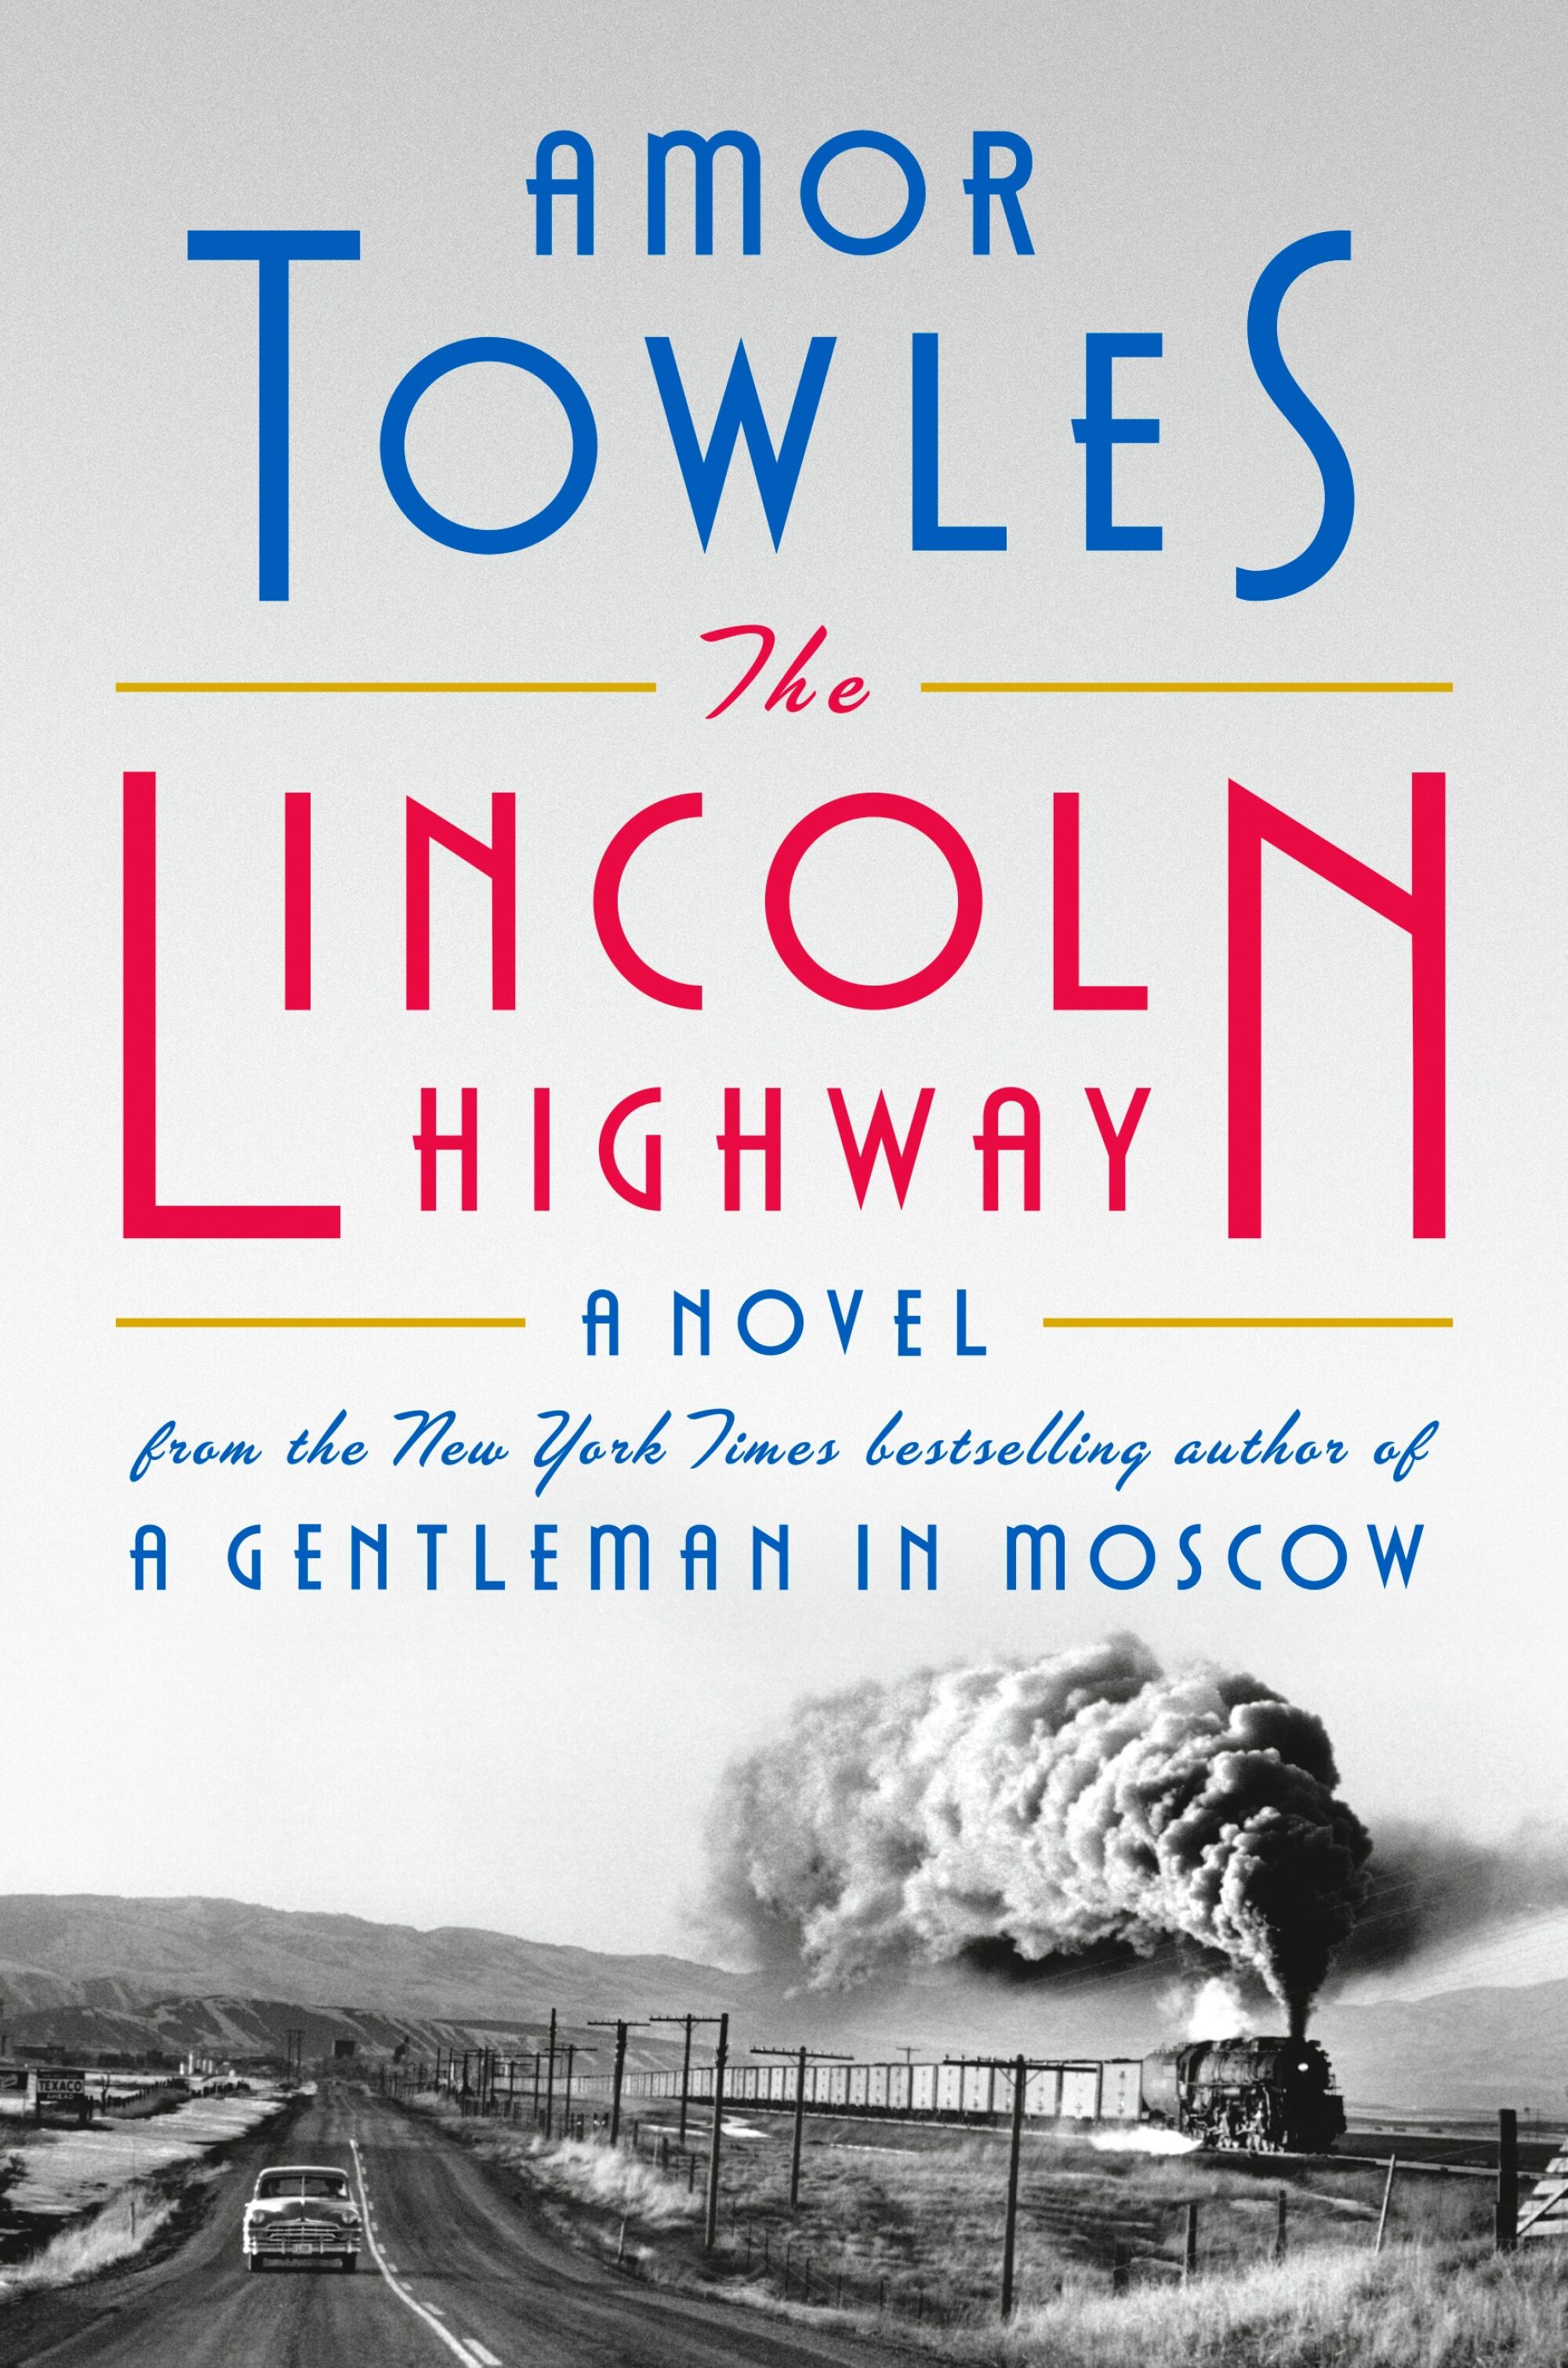 A black-and-white photograph of a vintage train and car on the cover for Amor Towles' "The Lincoln Highway."